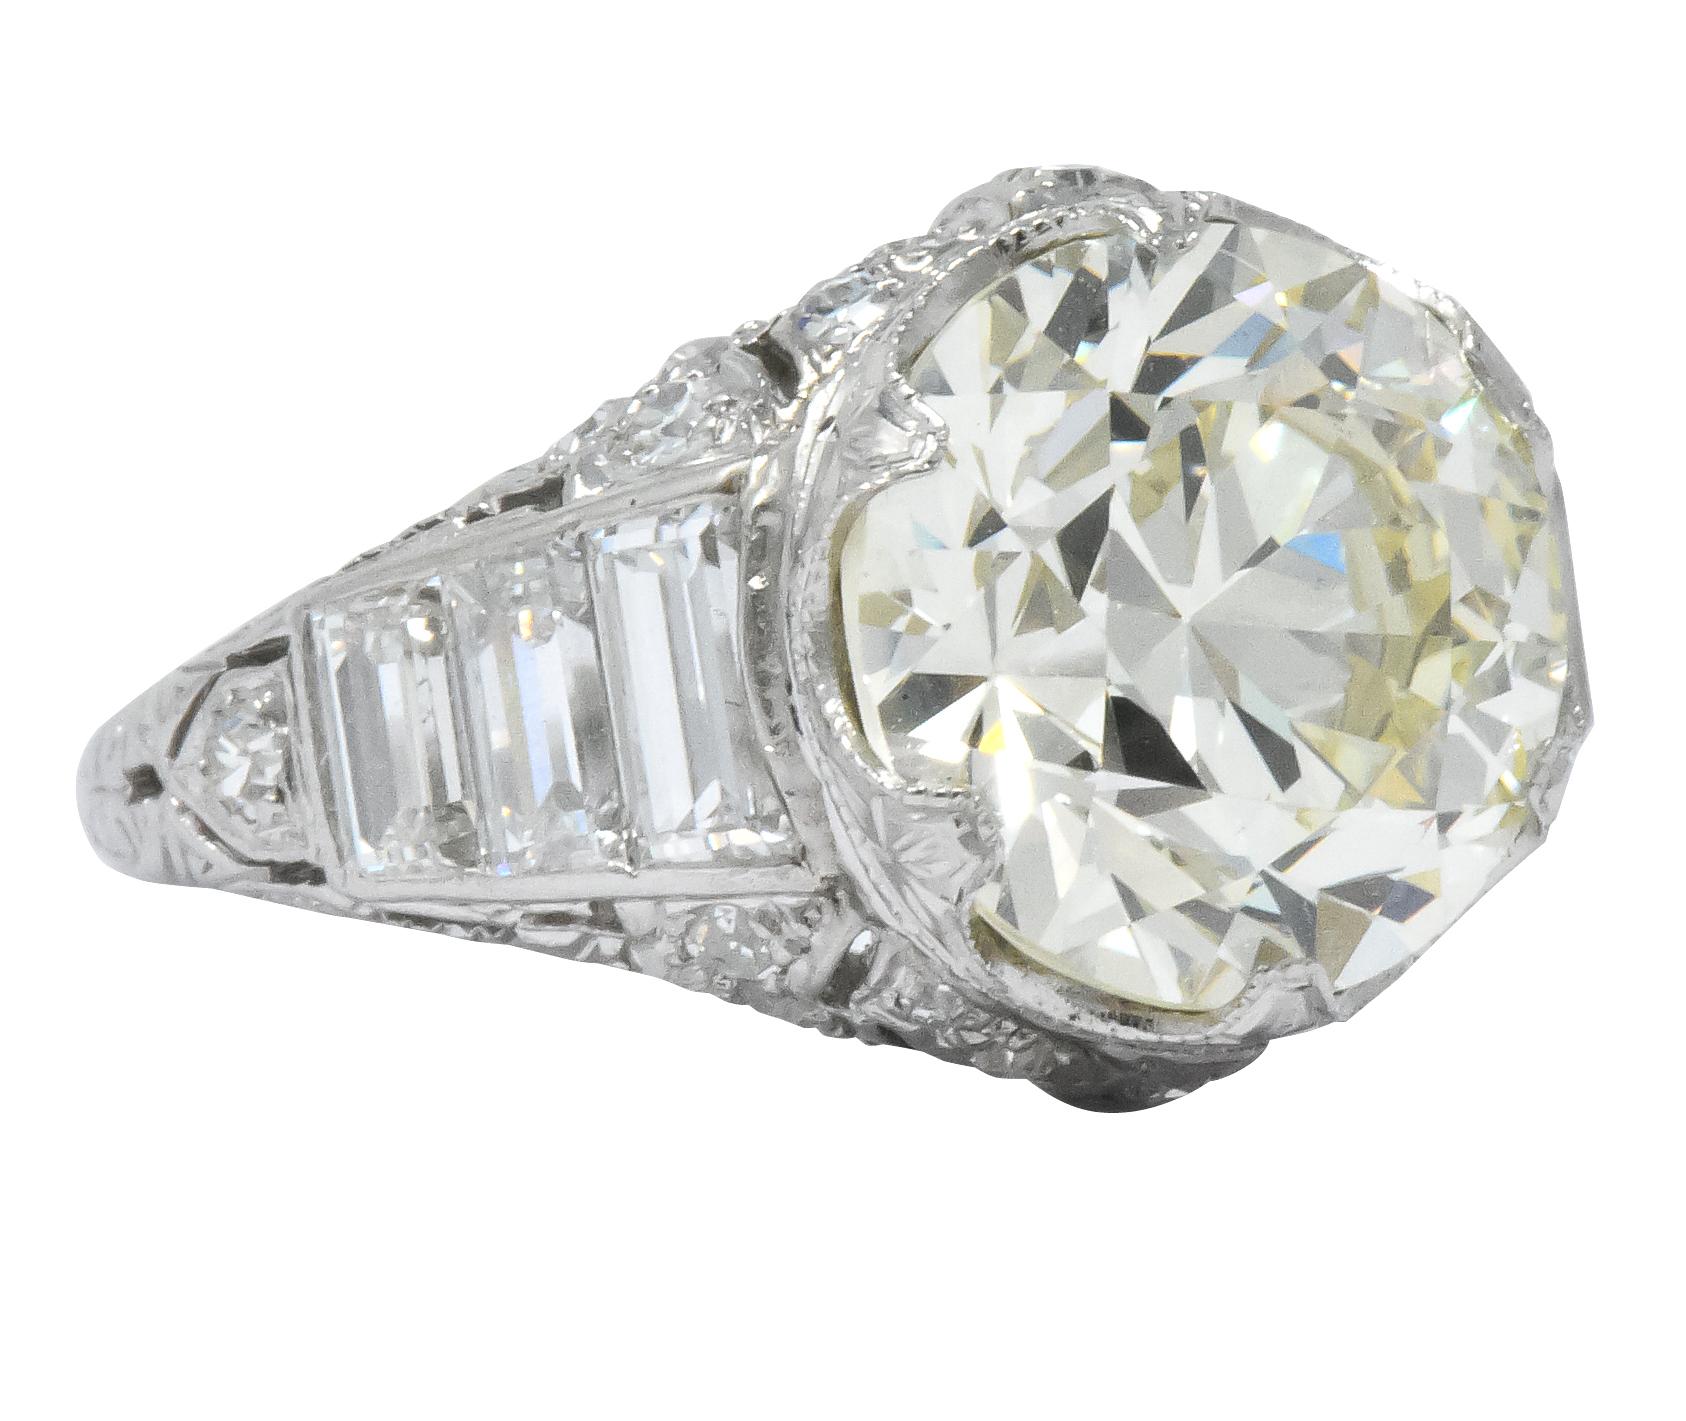 Centering a transitional cut diamond weighing 4.66 carats; O to P color with VS2 clarity

Ornately set with stylized scalloped prongs accented by milgrain and a hand engraved burst motif 

Flanked by channel set baguette cut diamonds and set